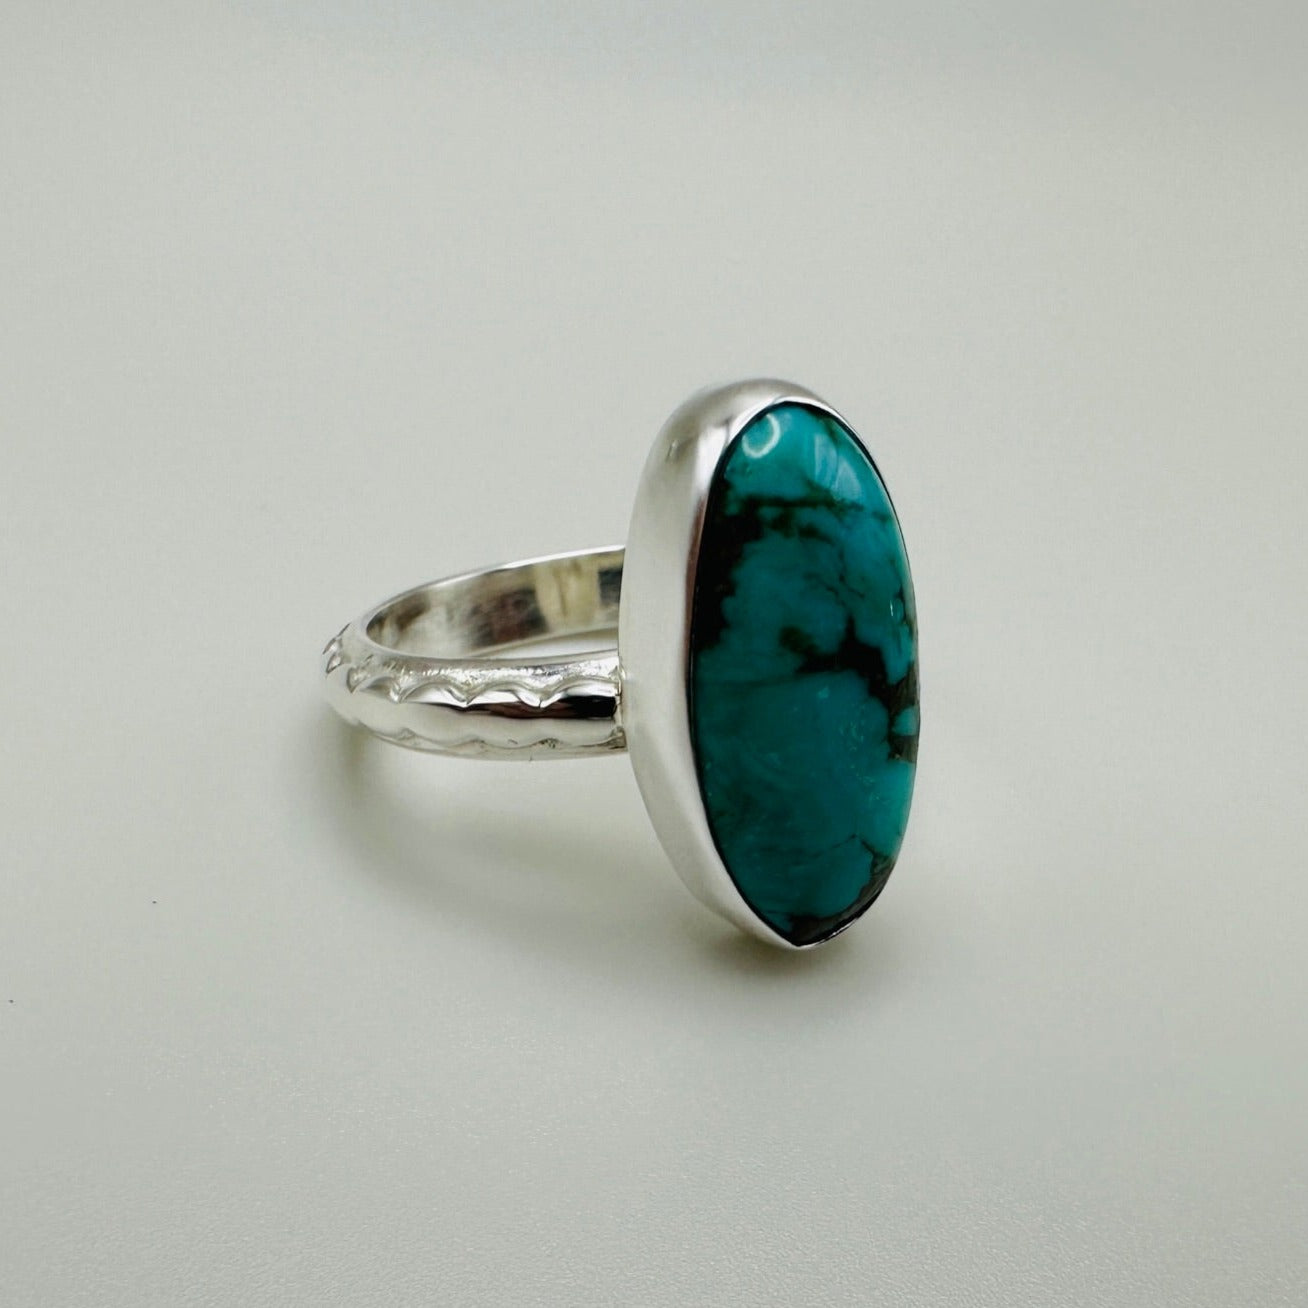 Kingman Turquoise Sterling Silver Ring, Size 7